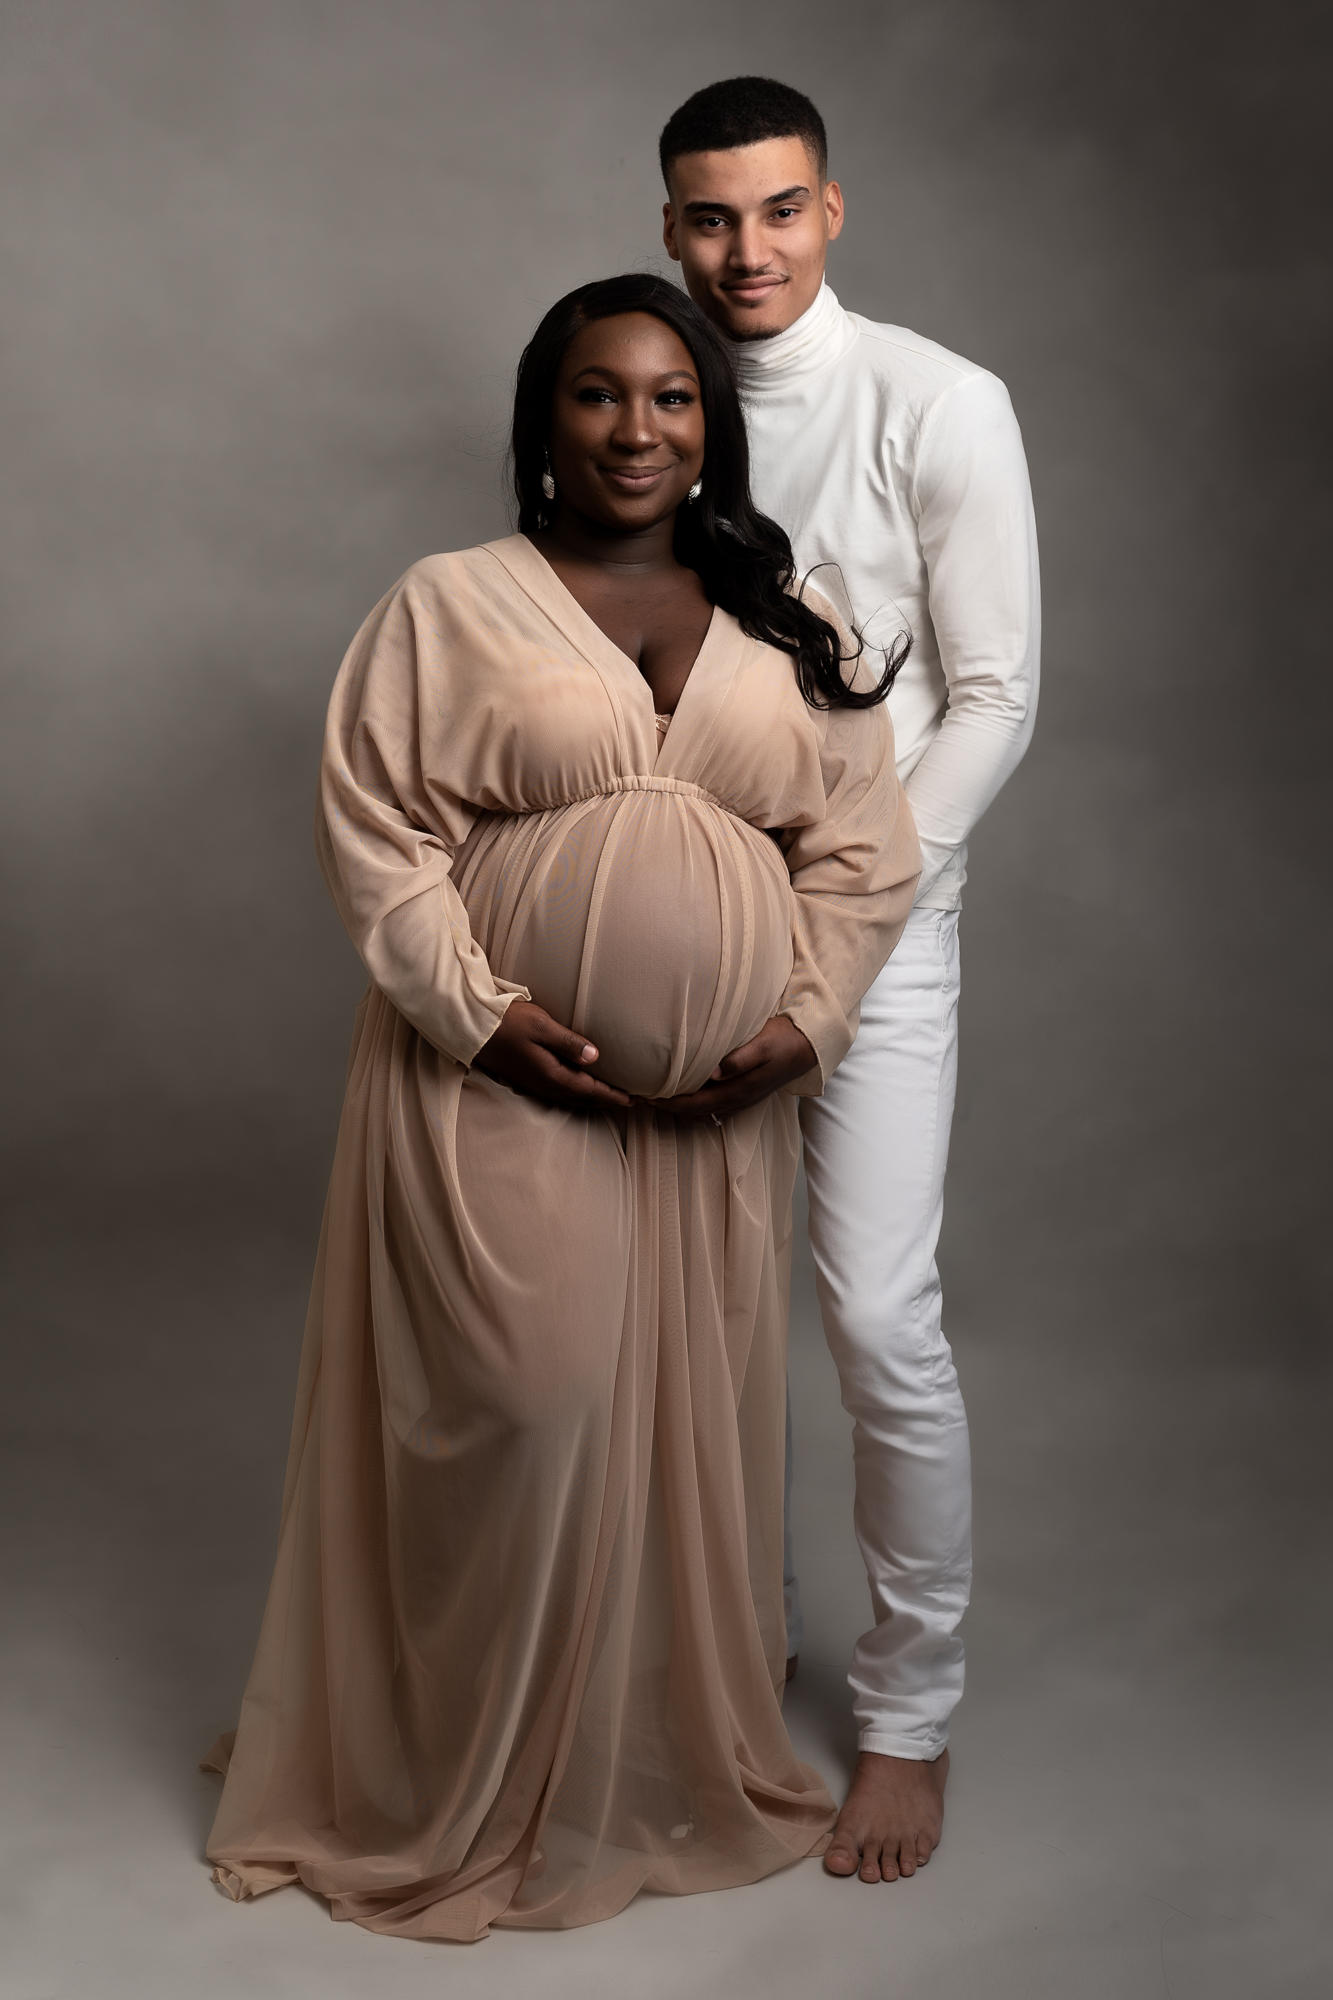 Can My Husband Be In My Maternity Photoshoot